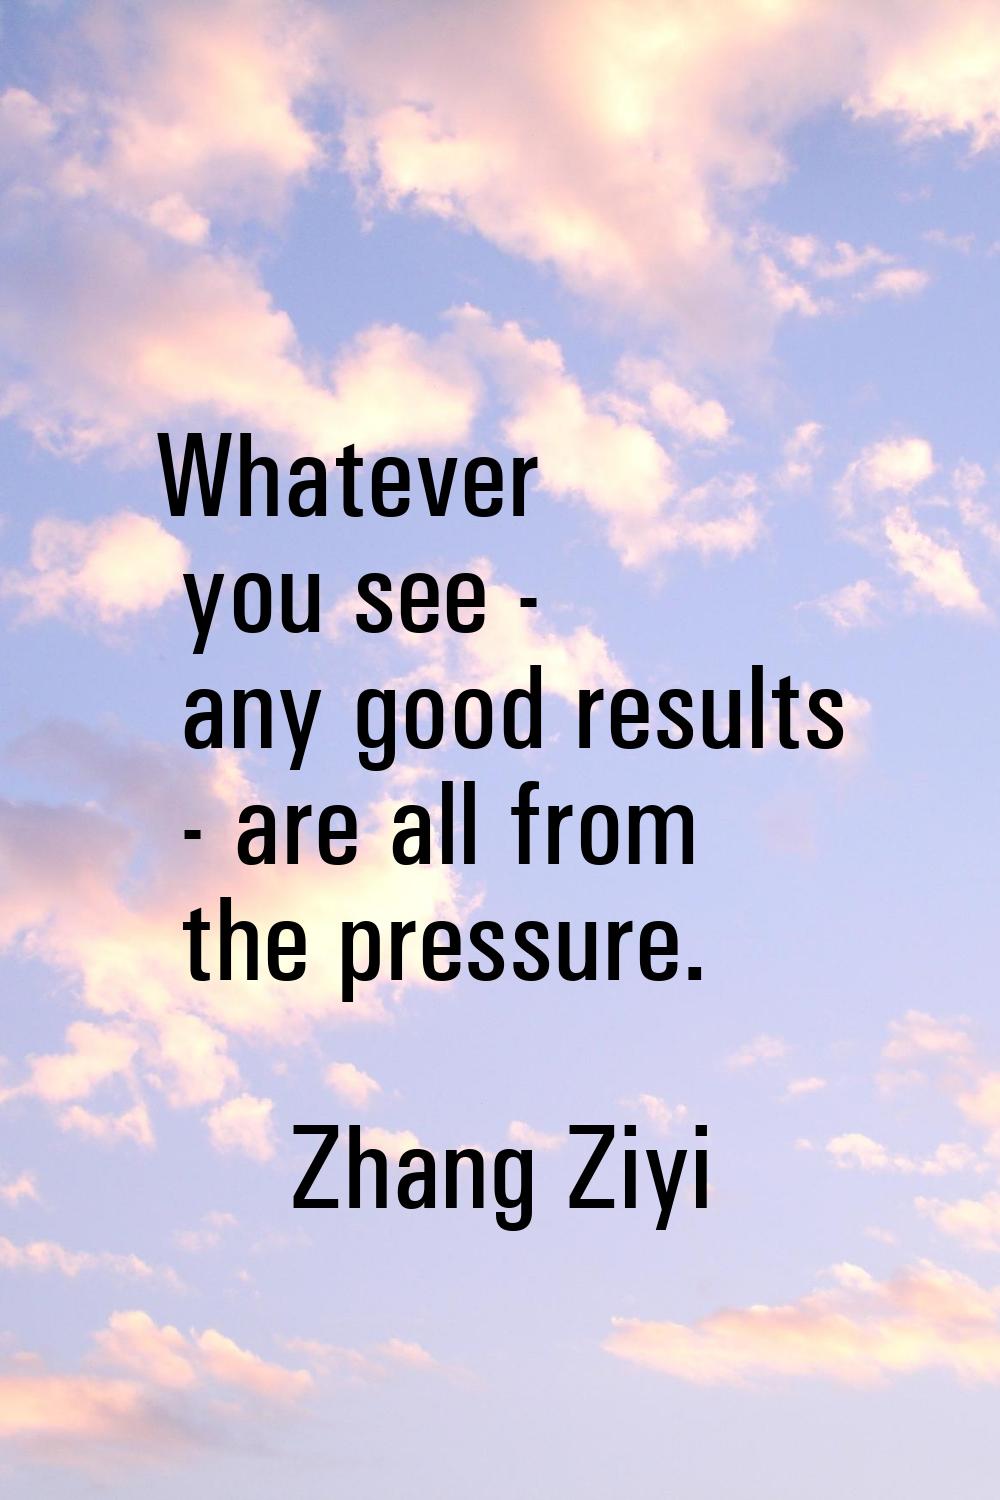 Whatever you see - any good results - are all from the pressure.